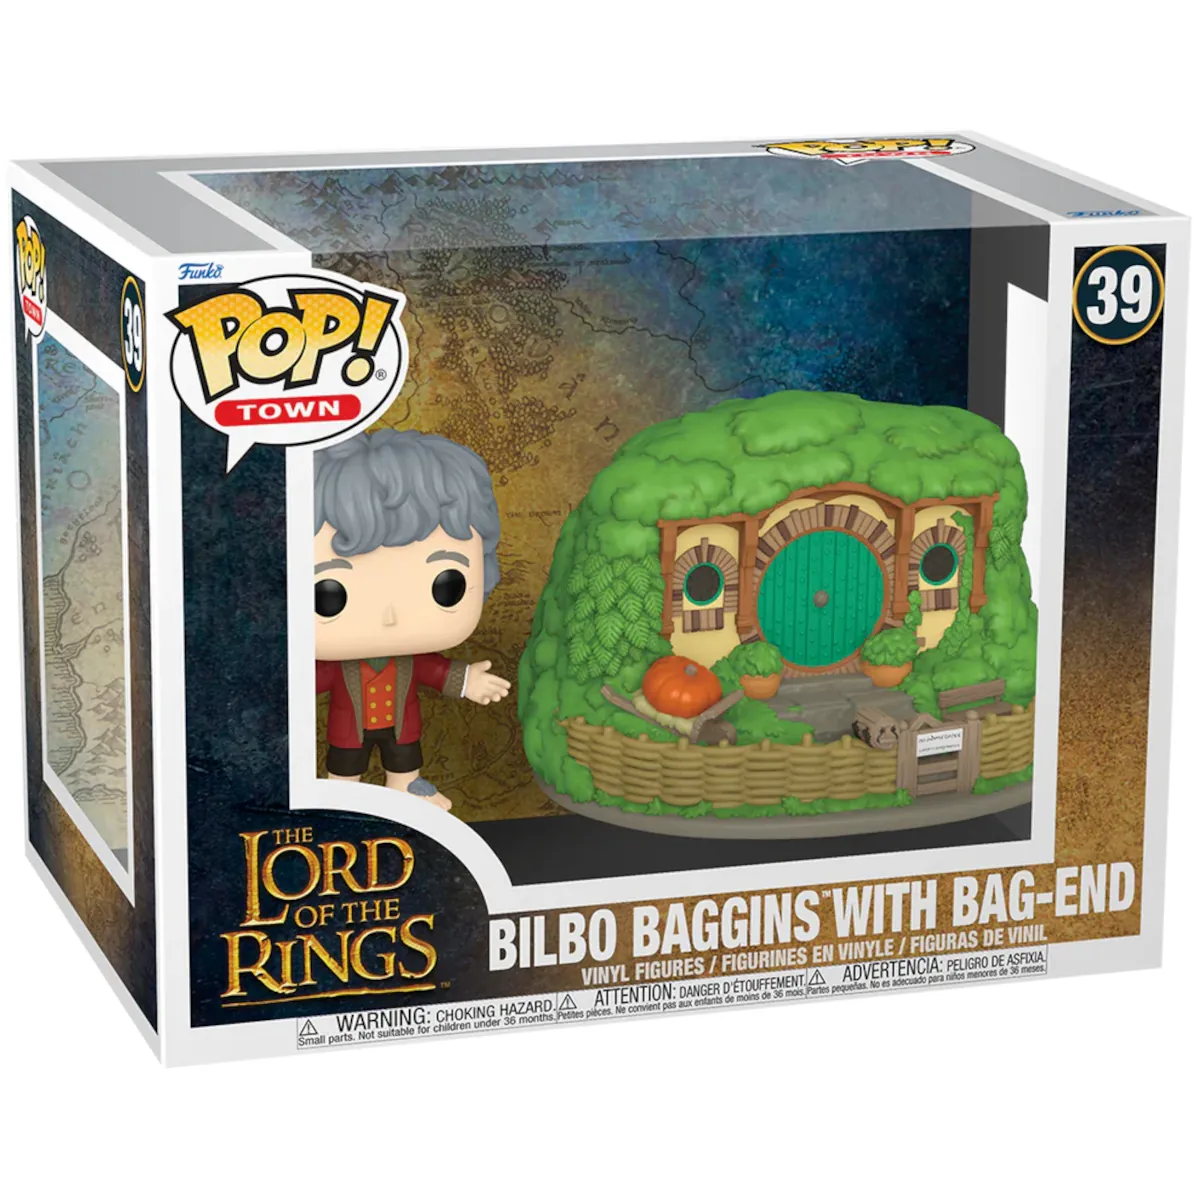 80835 Funko Pop! Town - The Lord of the Rings - Bilbo Baggins with Bag-End Collectable Vinyl Figure Box Front